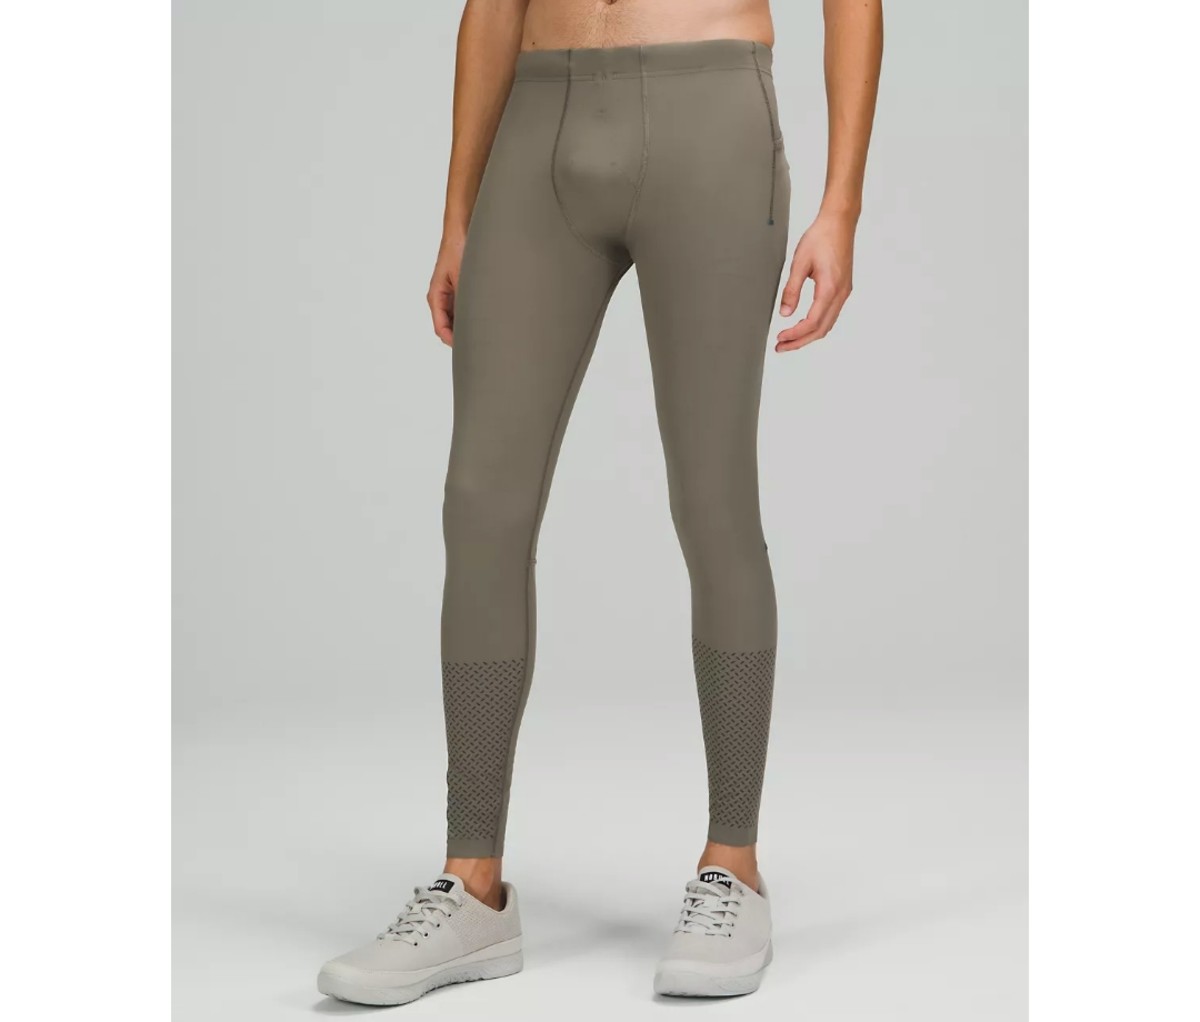 Are there leggings for men that are a looser fit in the crotch and waist  area and thick enough material there that can be worn without a long shirt  or shorts over